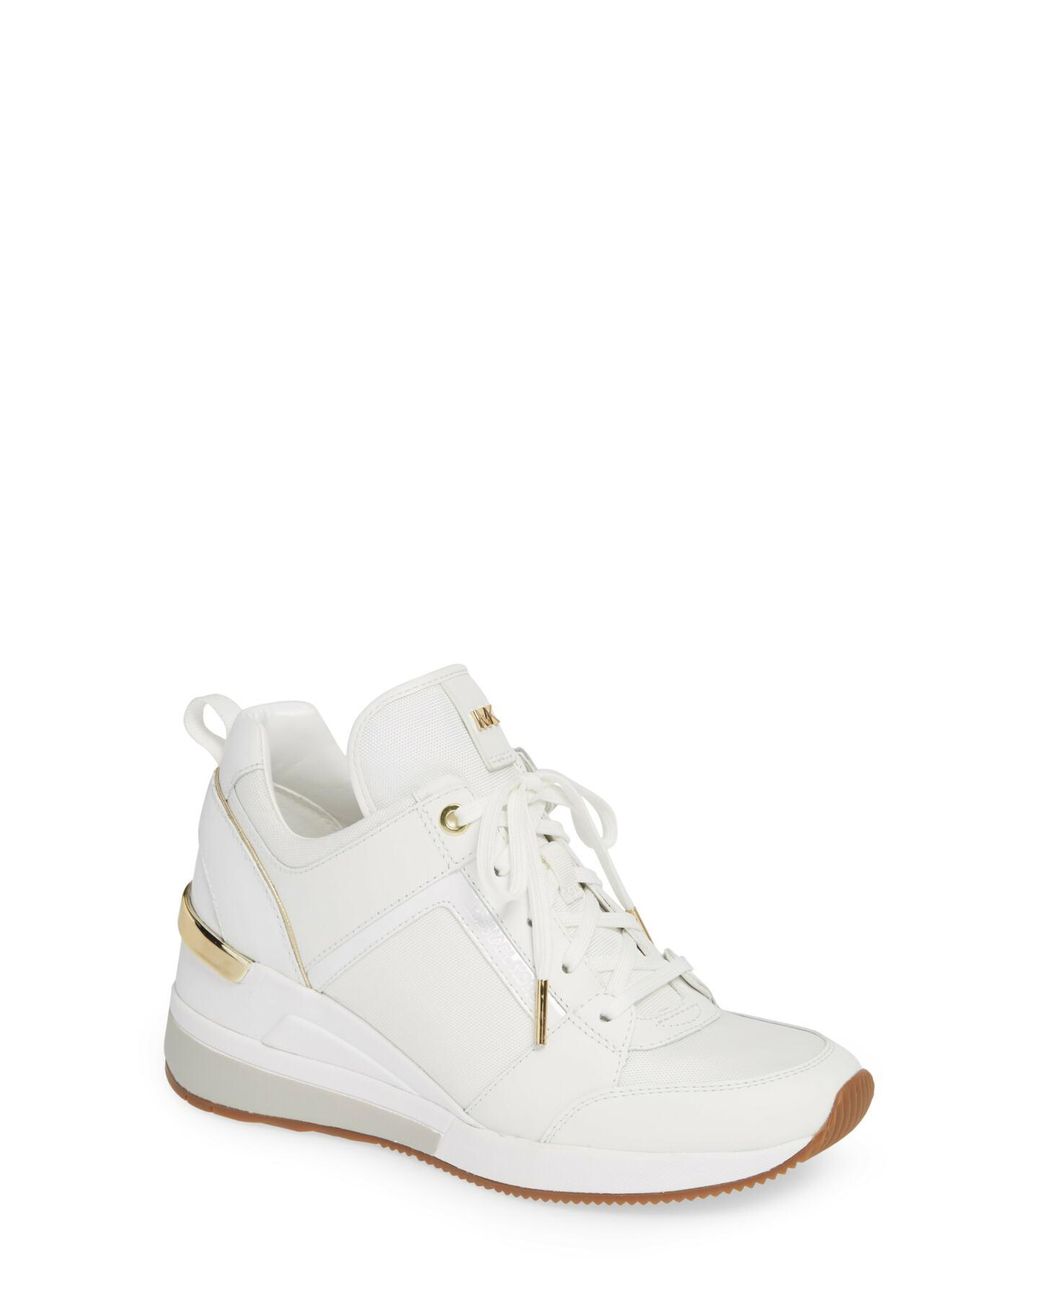 Michael Kors Georgie Canvas And Leather Sneaker in White | Lyst